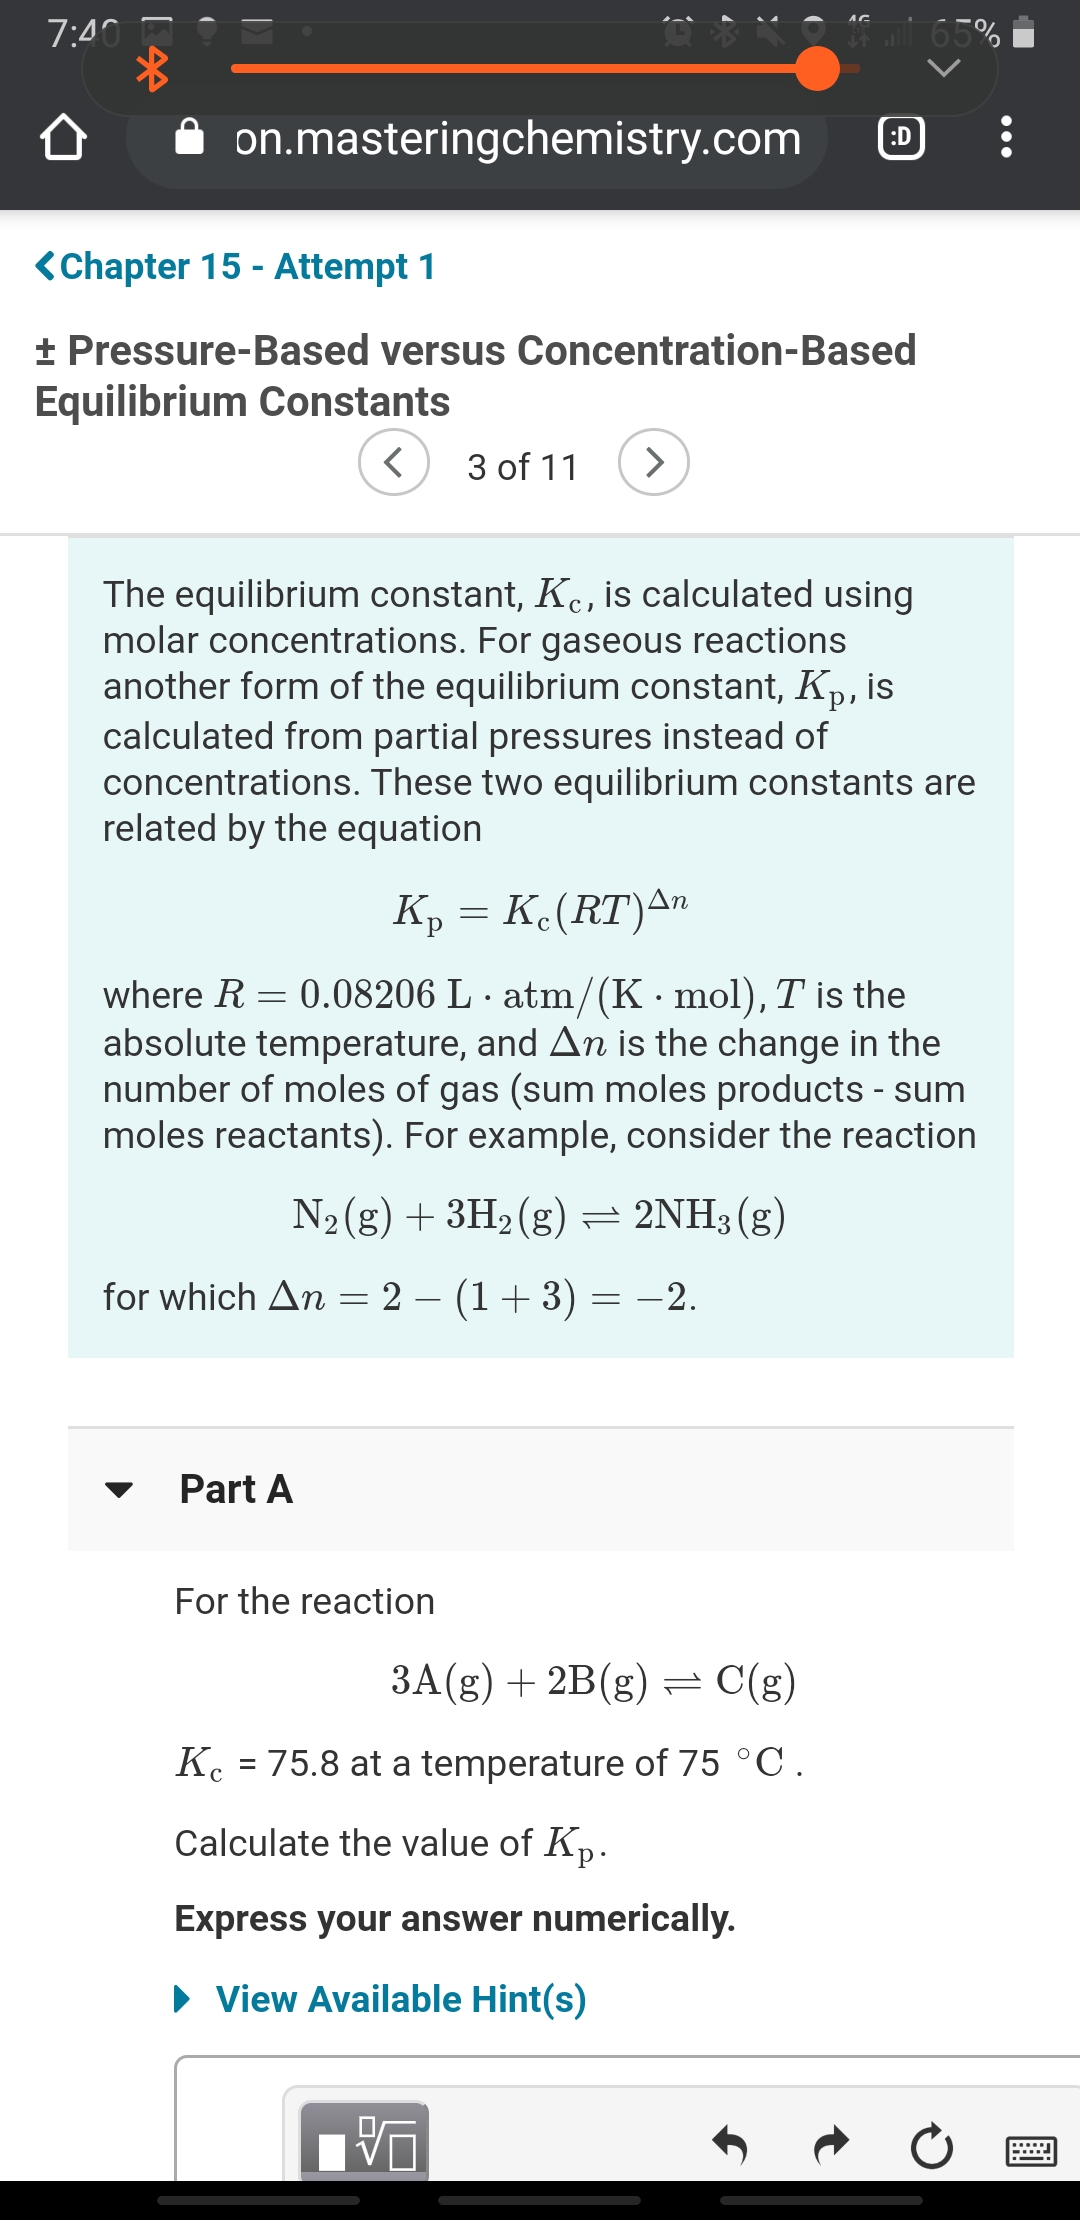 7:40
i 65%
on.masteringchemistry.com
:D
<Chapter 15 - Attempt 1
+ Pressure-Based versus Concentration-Based
Equilibrium Constants
3 of 11
<>
The equilibrium constant, K., is calculated using
molar concentrations. For gaseous reactions
another form of the equilibrium constant, Kp, is
calculated from partial pressures instead of
concentrations. These two equilibrium constants are
related by the equation
Kp = K.(RT)An
0.08206 L · atm/(K· mol), T is the
absolute temperature, and An is the change in the
number of moles of gas (sum moles products - sum
moles reactants). For example, consider the reaction
where R
N2(g) + 3H2(g) = 2NH3 (g)
for which An = 2 – (1+ 3) = -2.
Part A
For the reaction
3A(g) + 2B(g)=
C(g)
Kc = 75.8 at a temperature of 75 °C.
Calculate the value of Kp.
Express your answer numerically.
• View Available Hint(s)
